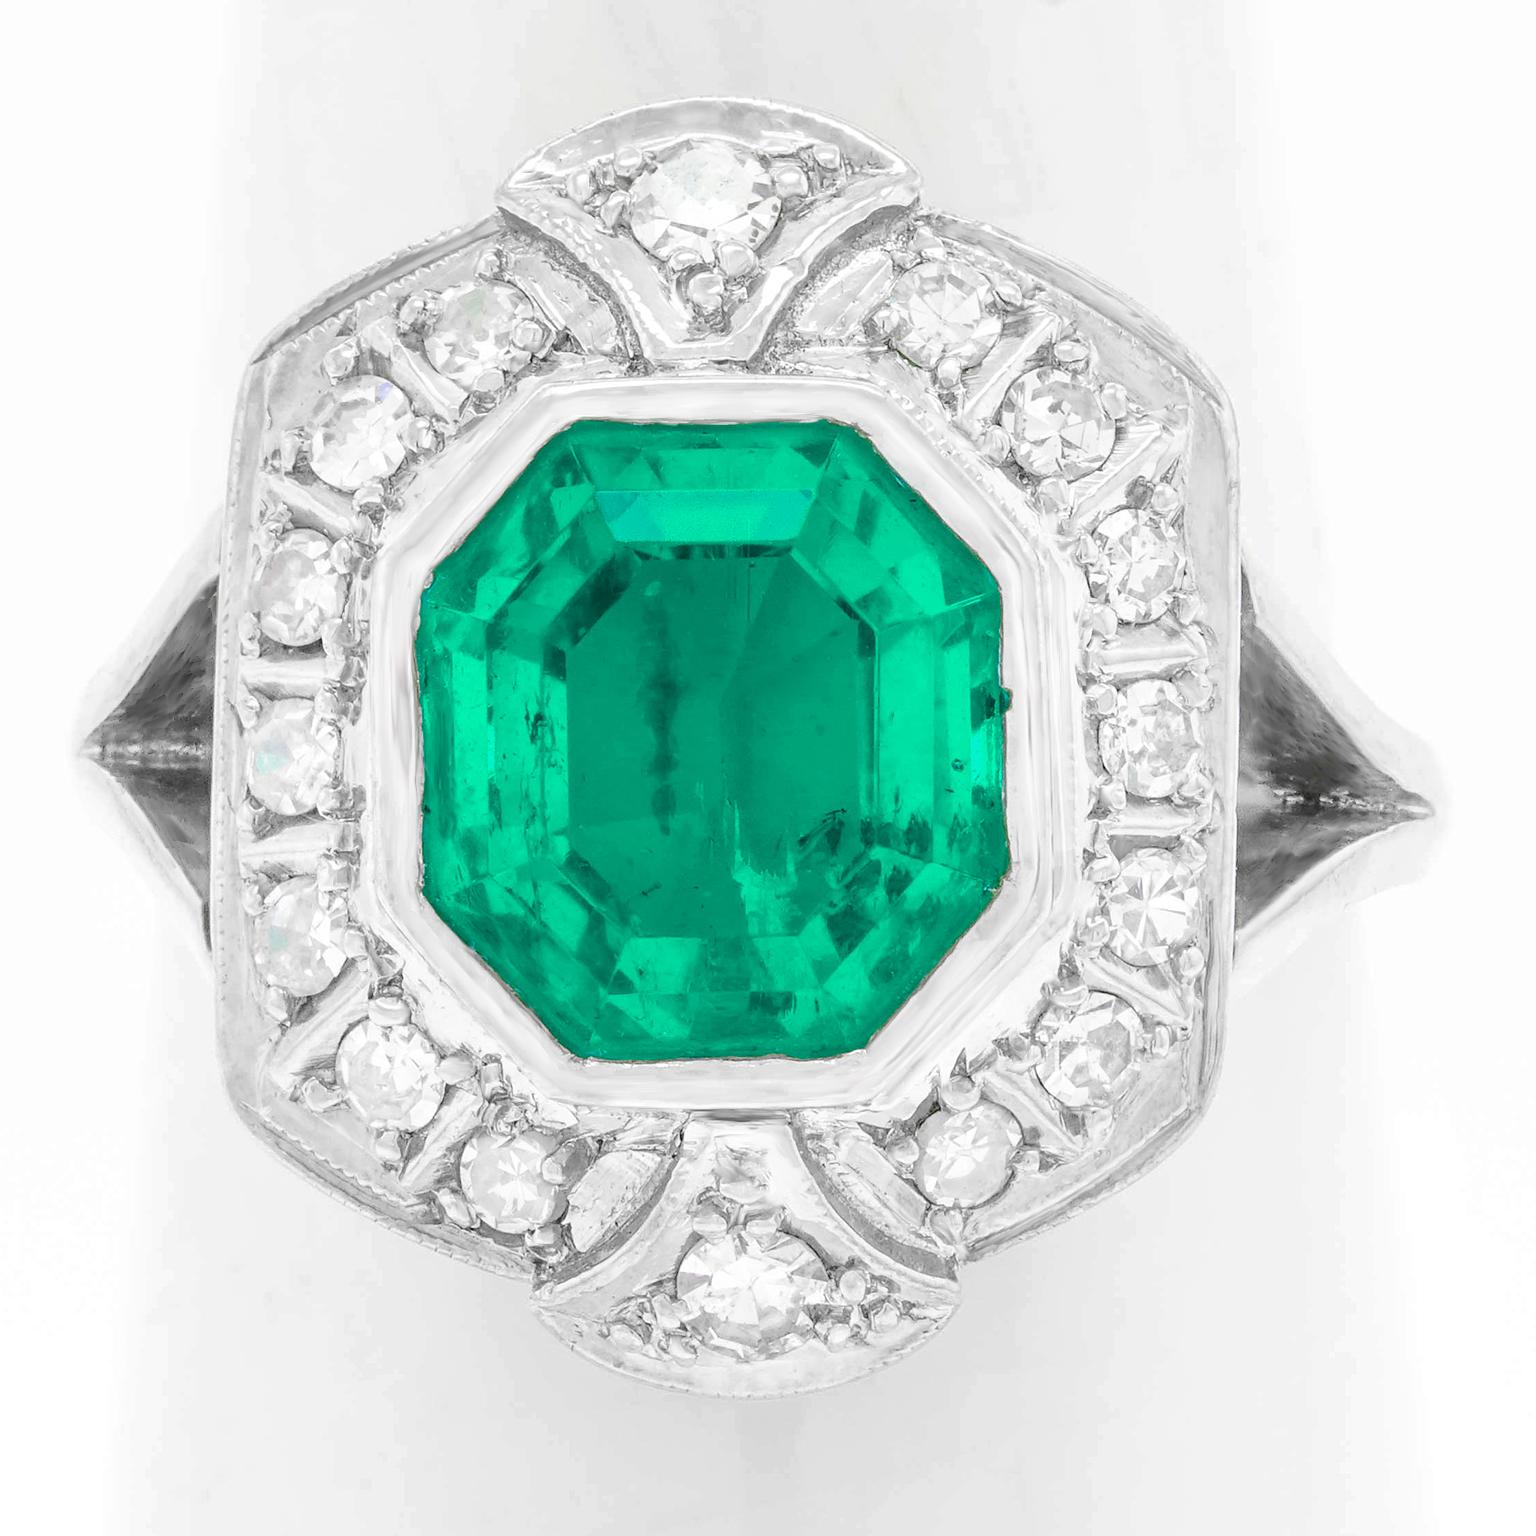 4.50 Carat Colombian Emerald and Diamond Art Deco Ring, GIA 4